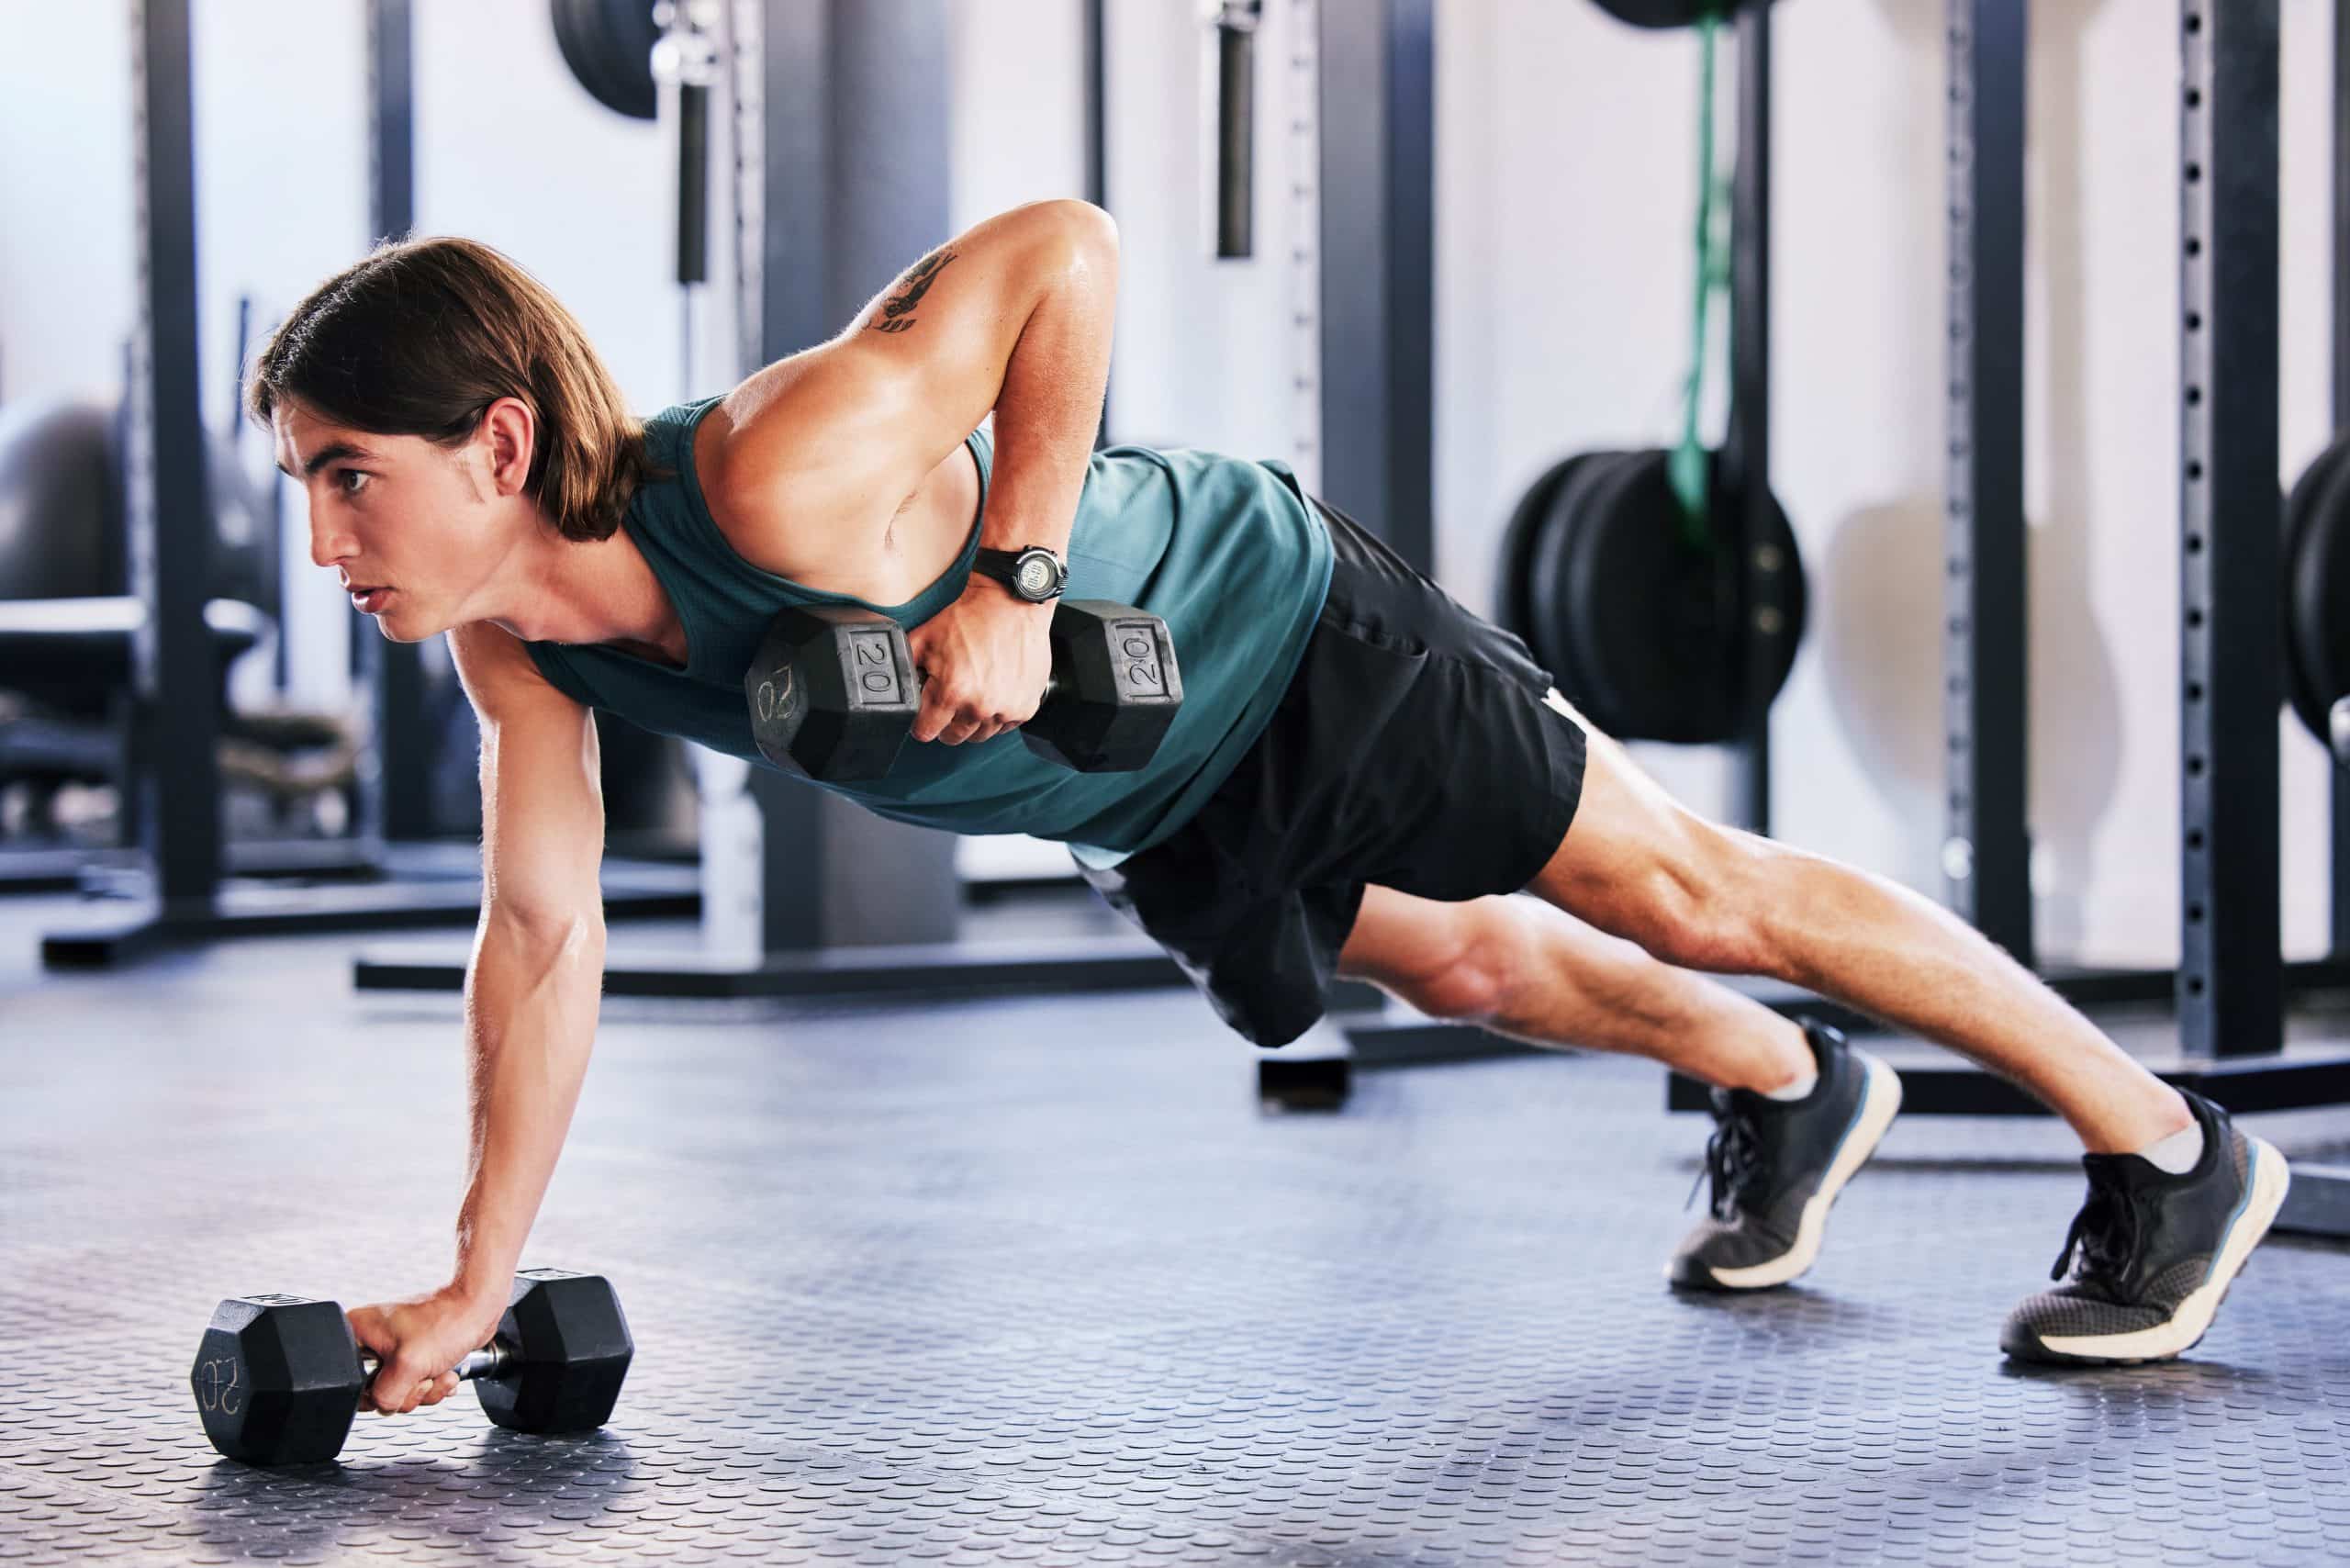 Take Pride in Your Upper Body with this 15-Minute Arms Blast Workout